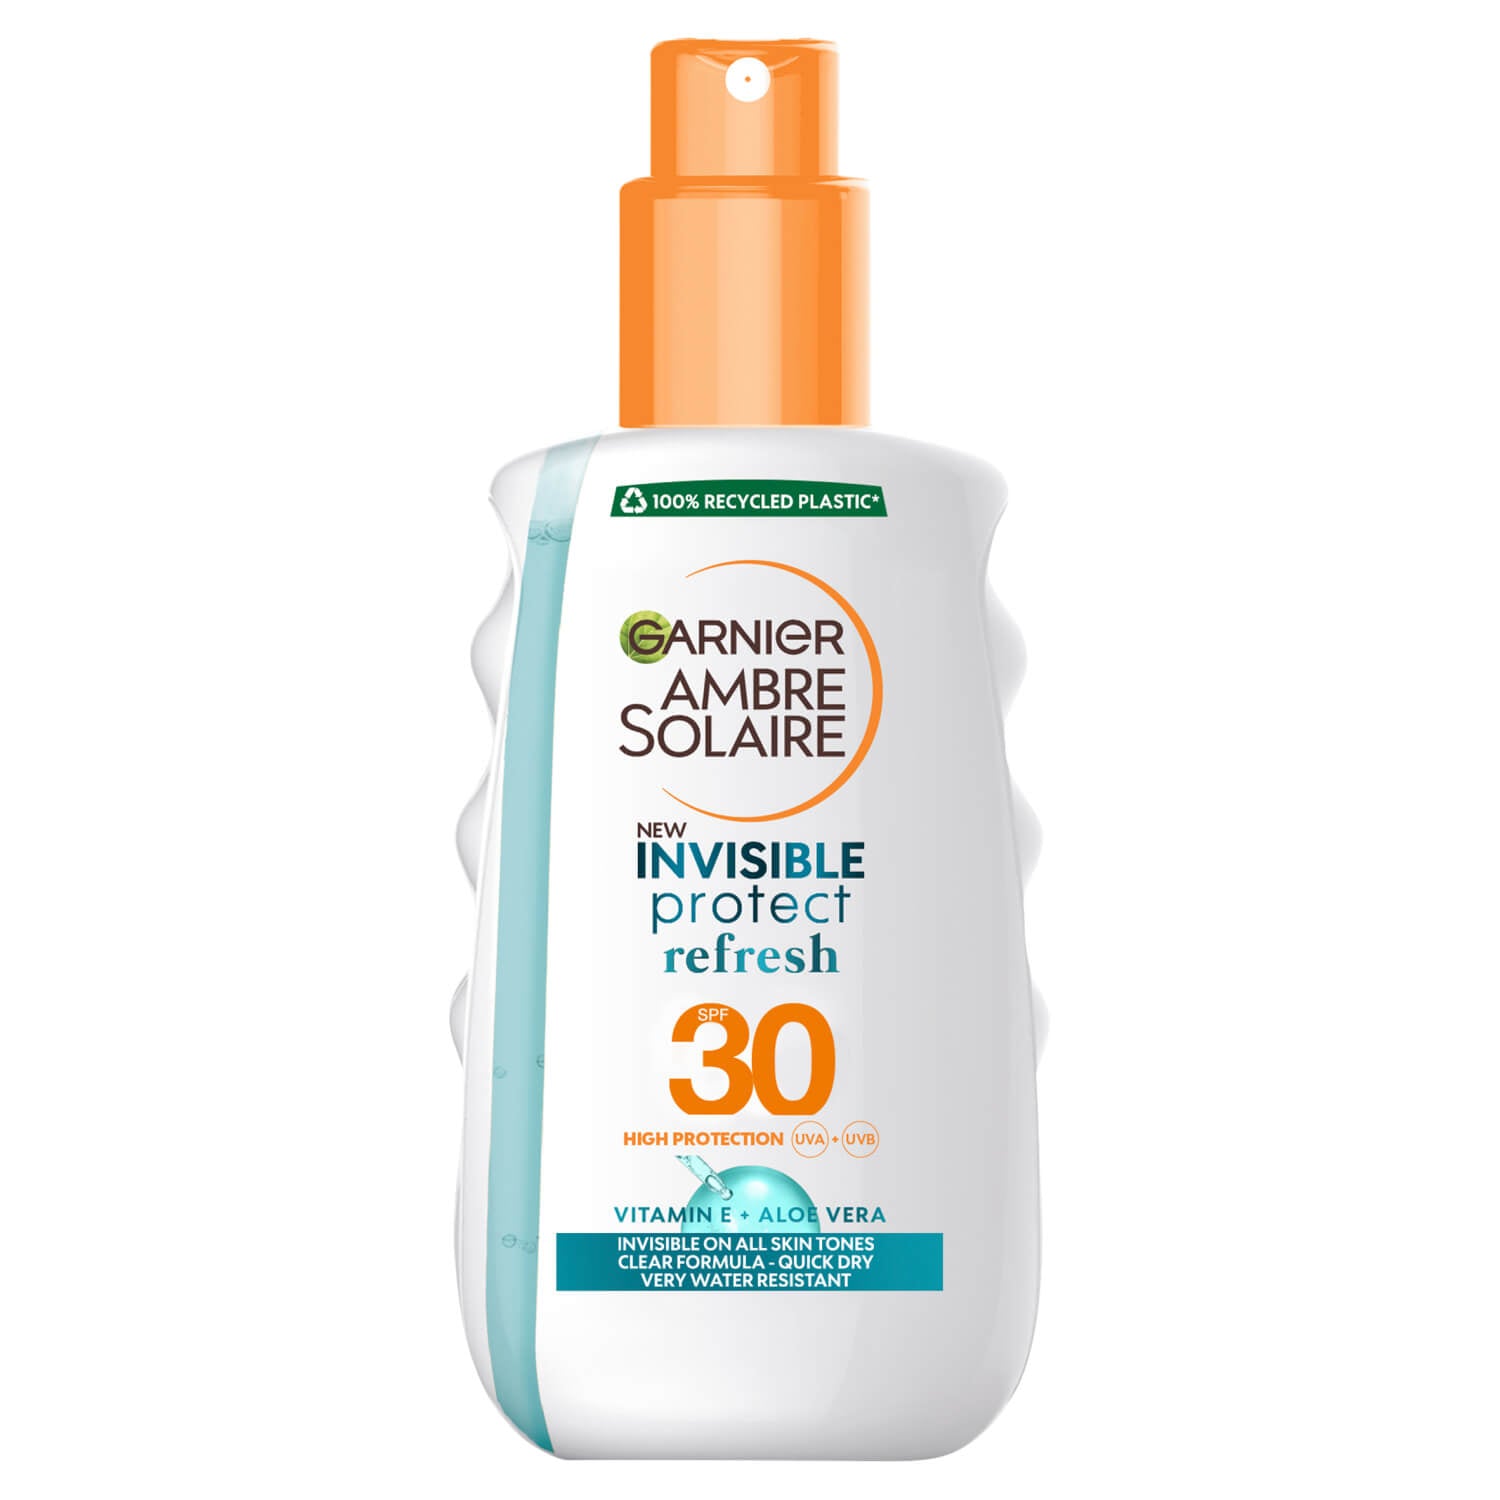 Garnier Ambre Solaire Invisible Protect Refresh Spray SPF30 - 200ml 1 Shaws Department Stores